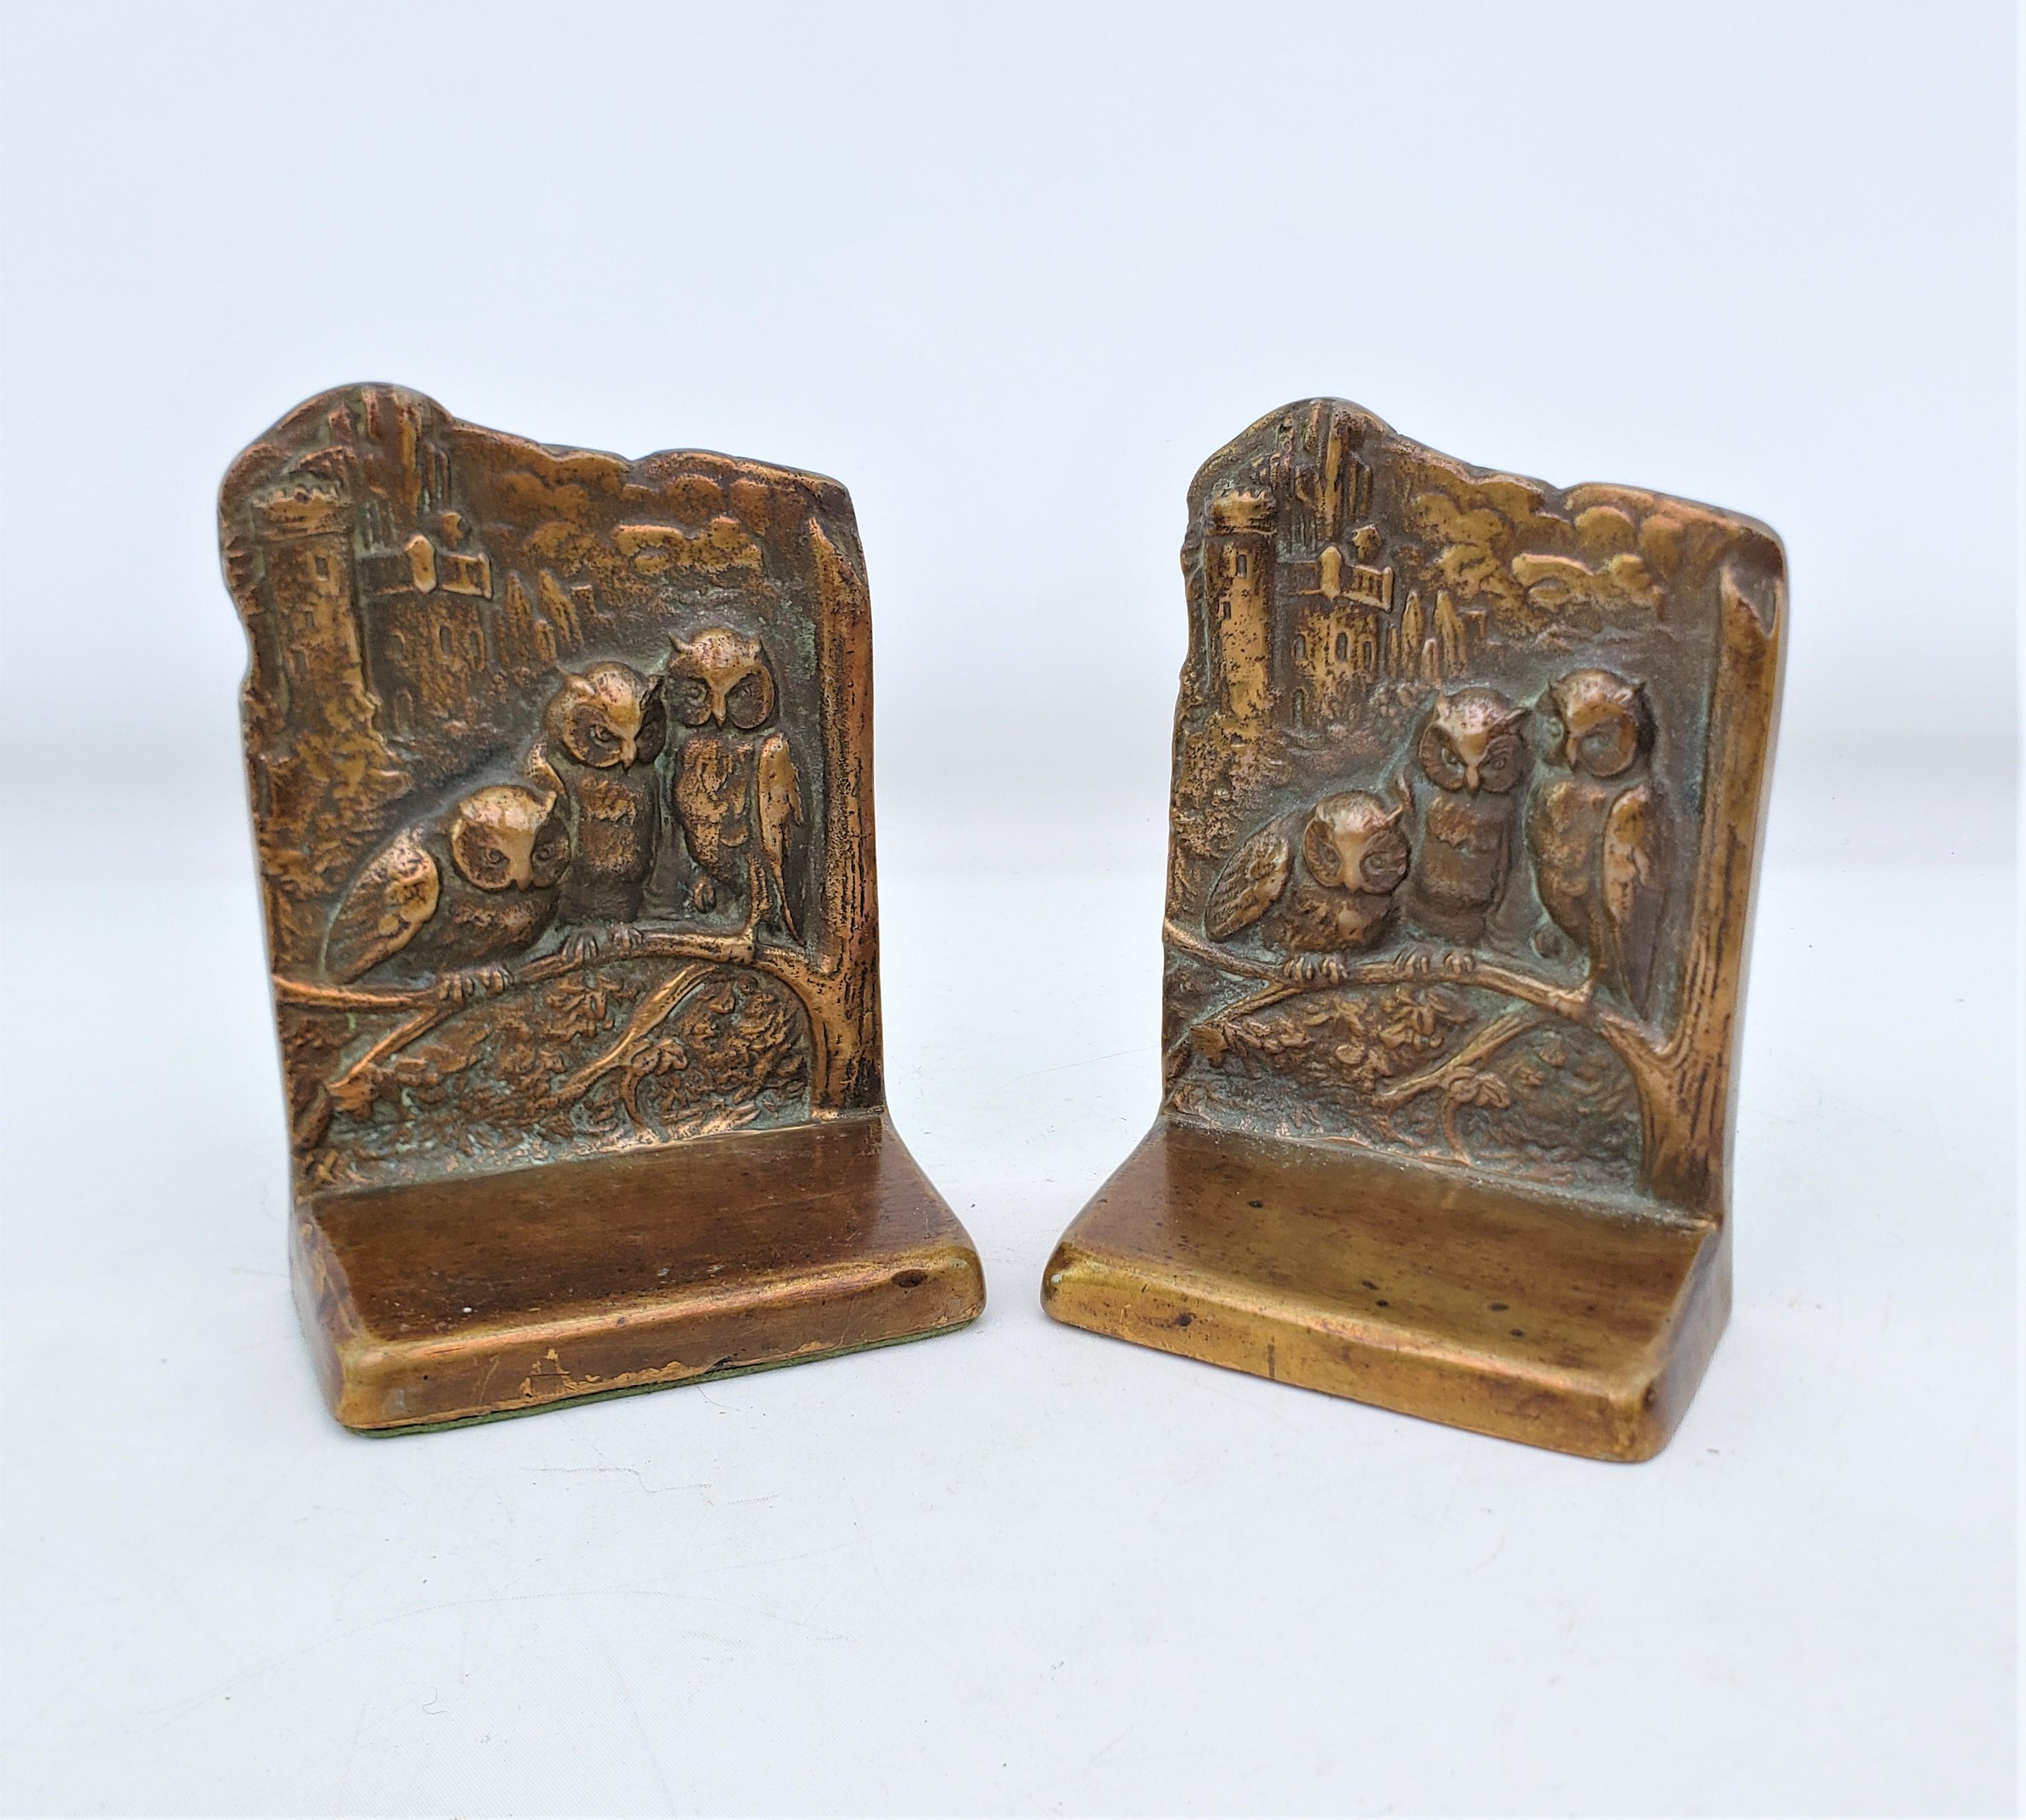 Antique Art Deco Cast & Patinated Brass Bookends Depicting Three Perched Owls In Good Condition For Sale In Hamilton, Ontario